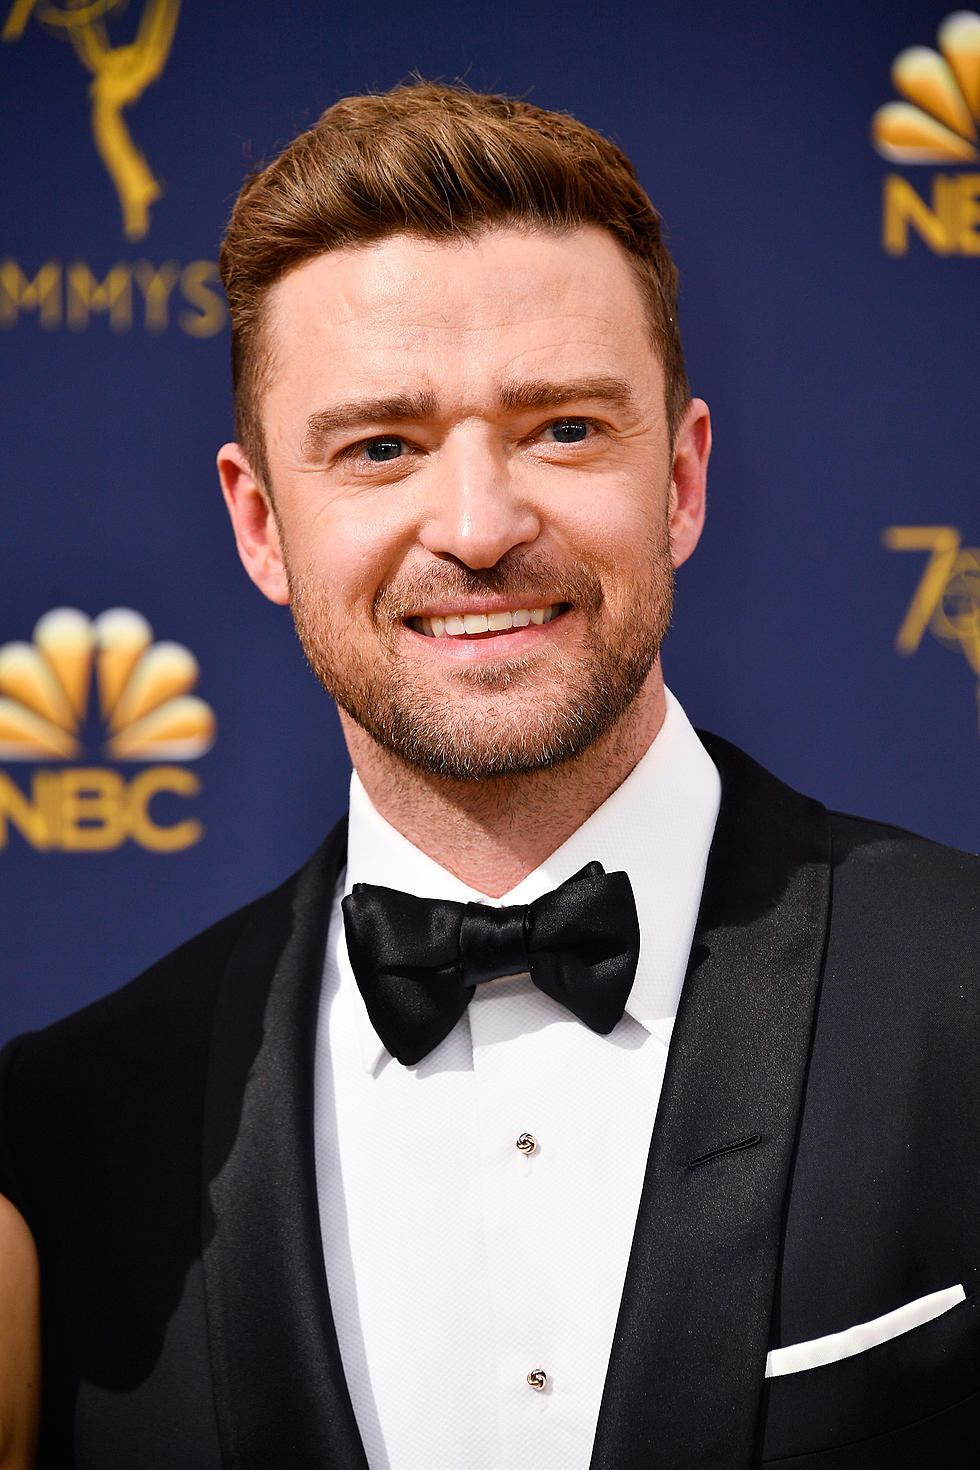 Justin Timberlake Talks To Kids, Eats Wings, and Sings with Jimmy